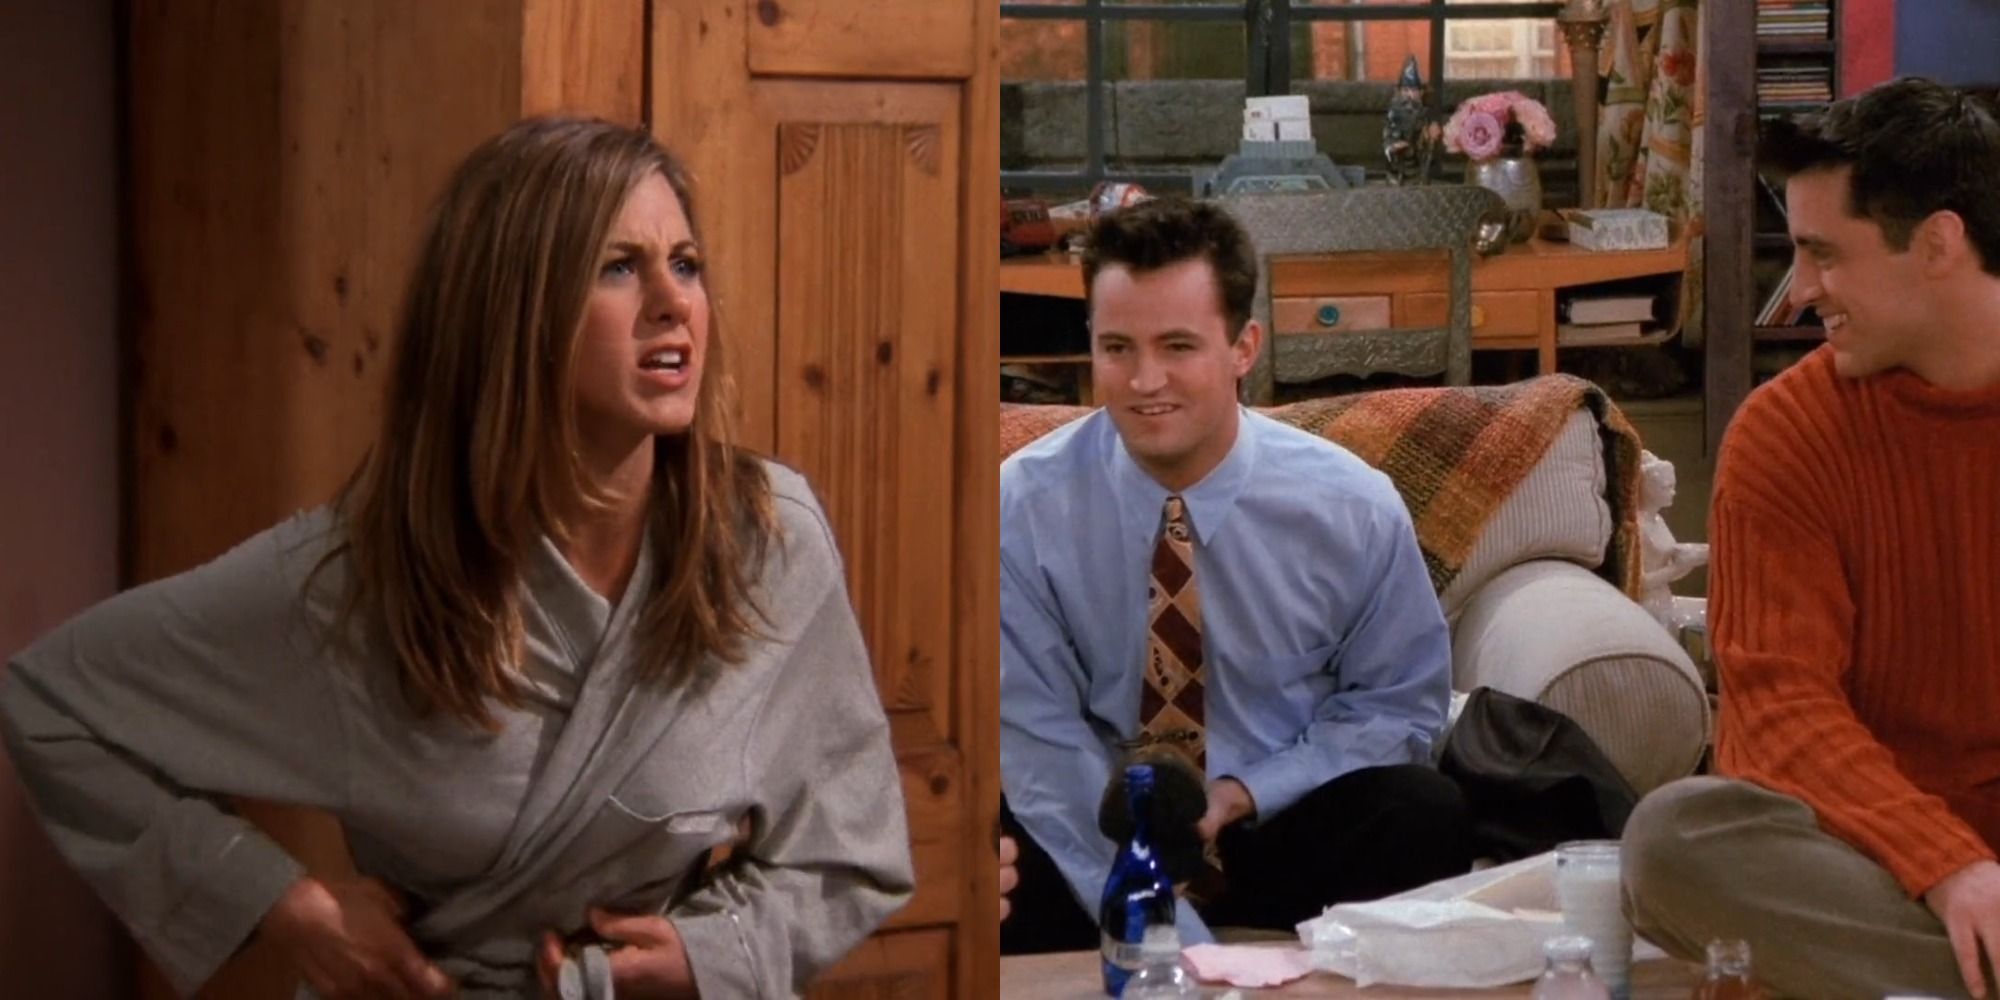 Main image showing Rachel Chandler and Joey from Friends